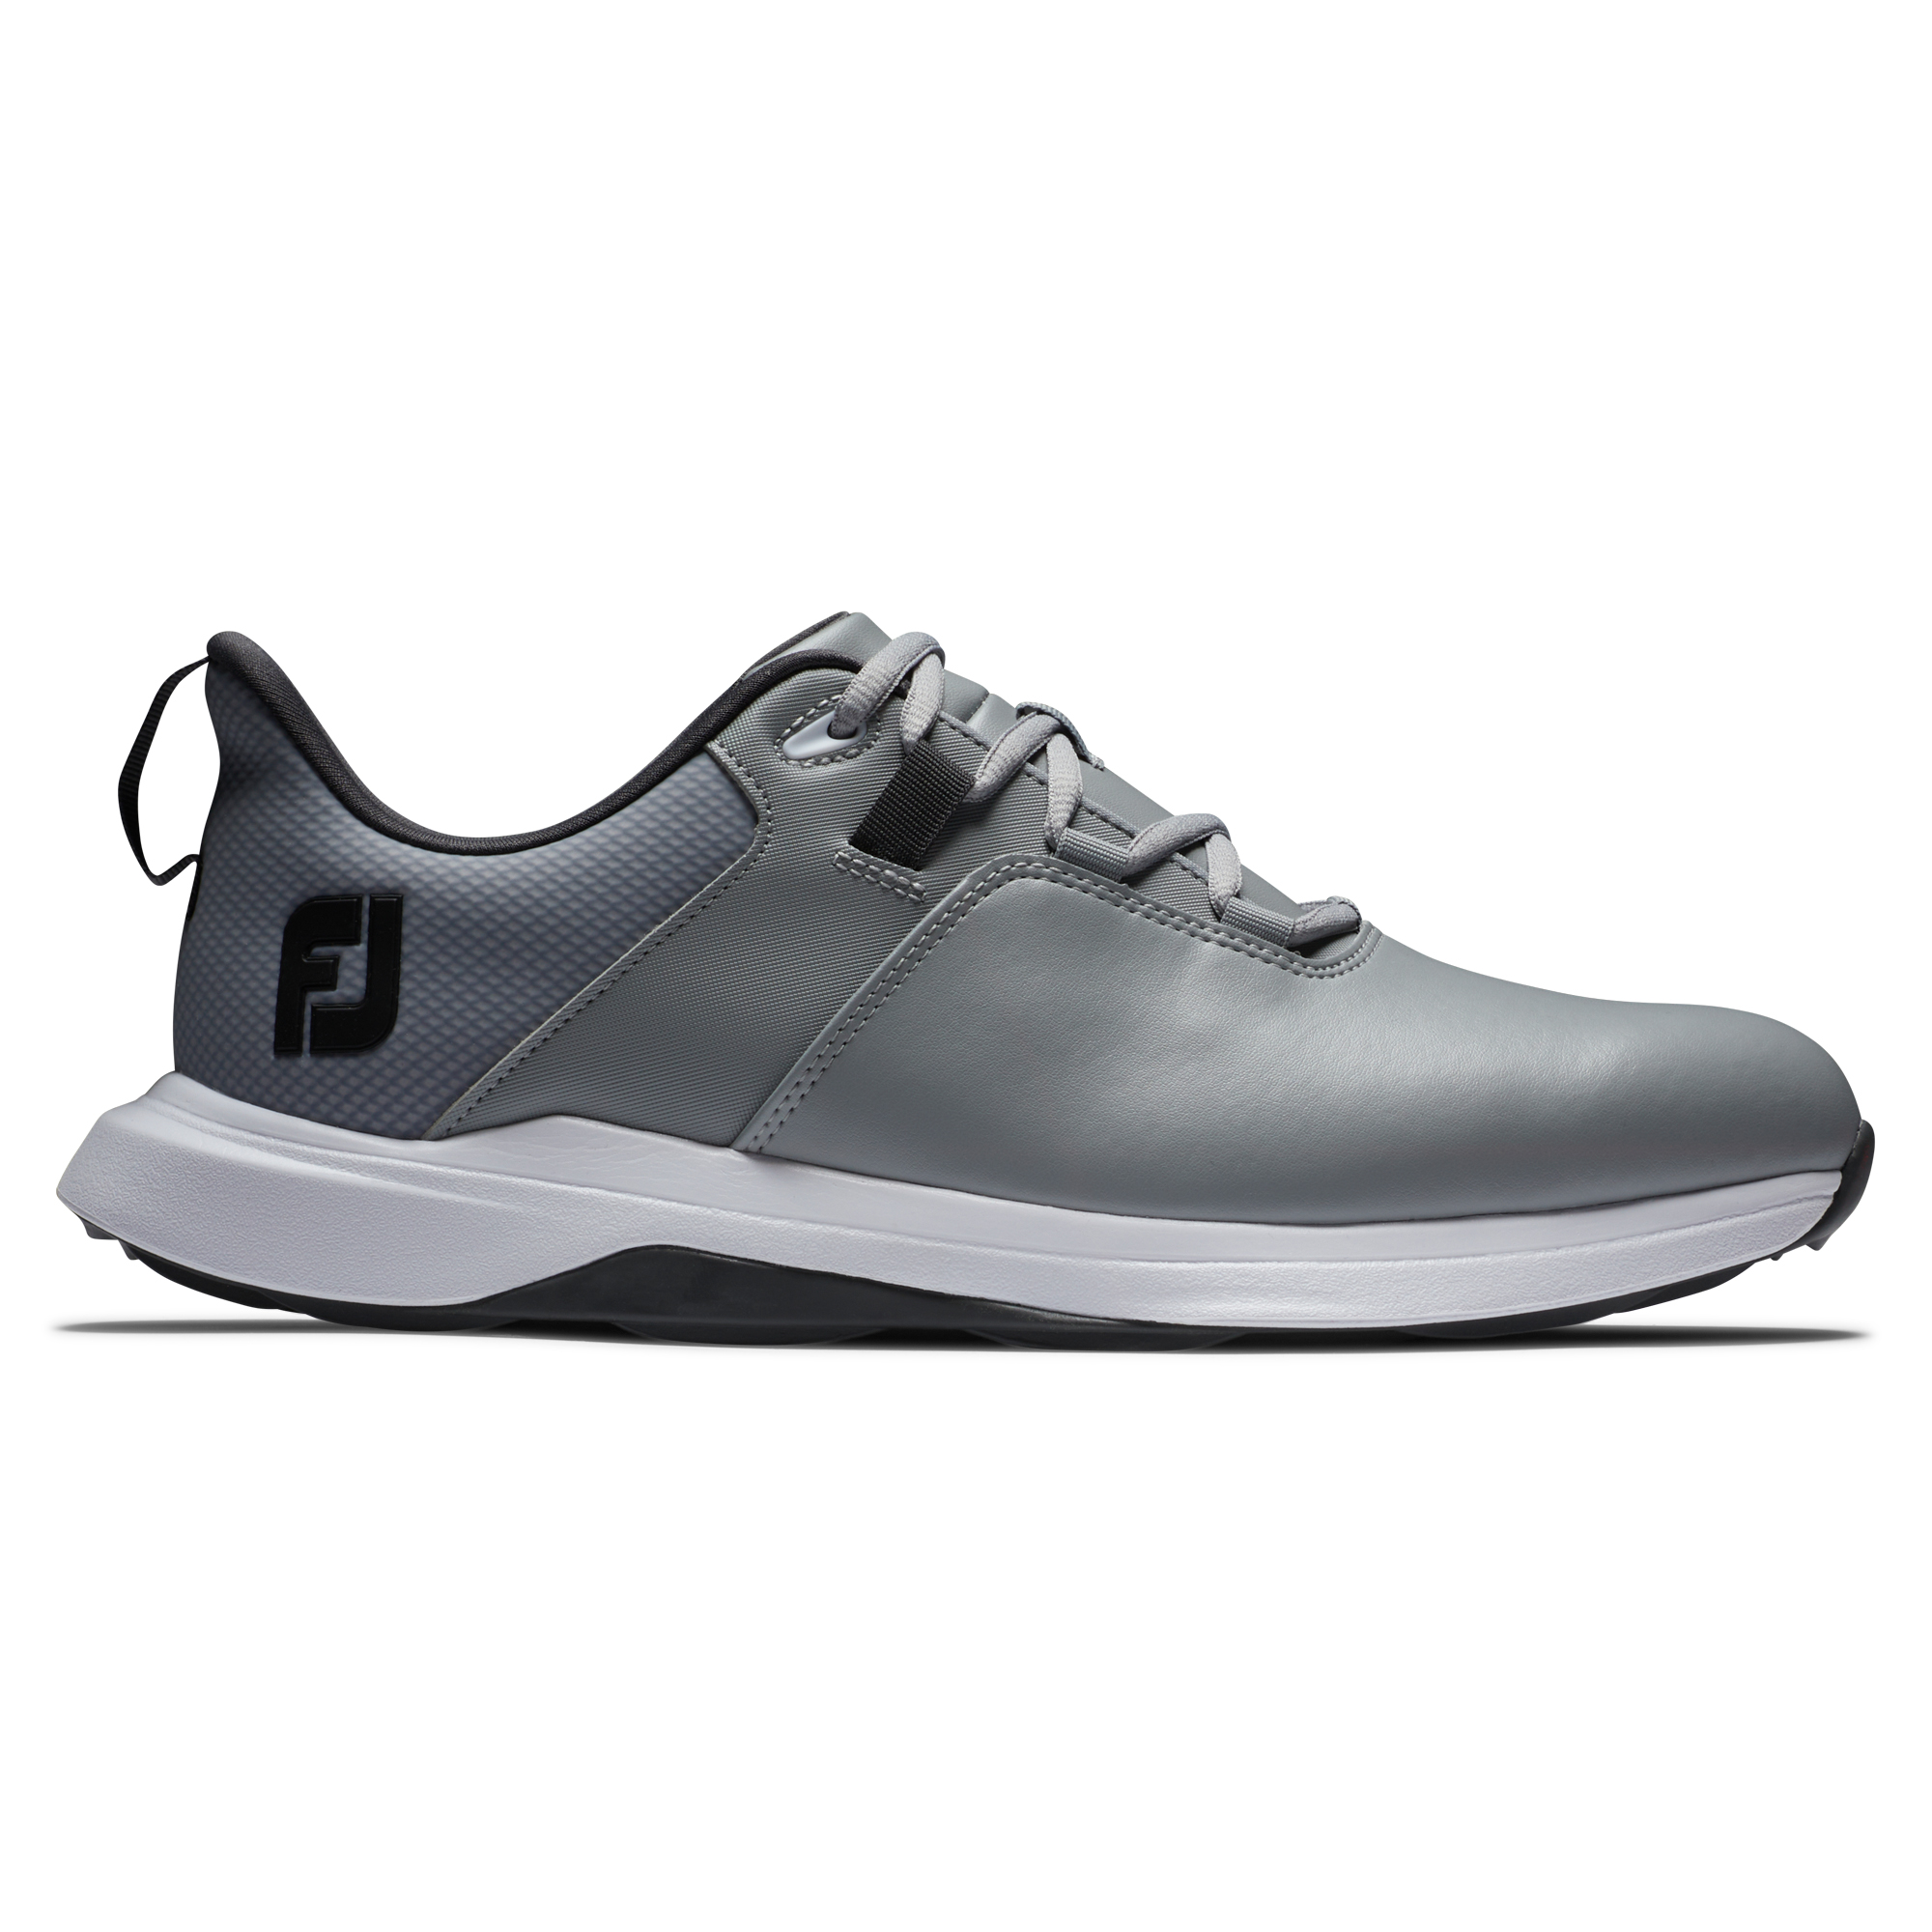 FootJoy ProLite Mens Spikeless Golf Shoes  - Grey/Charcoal/White